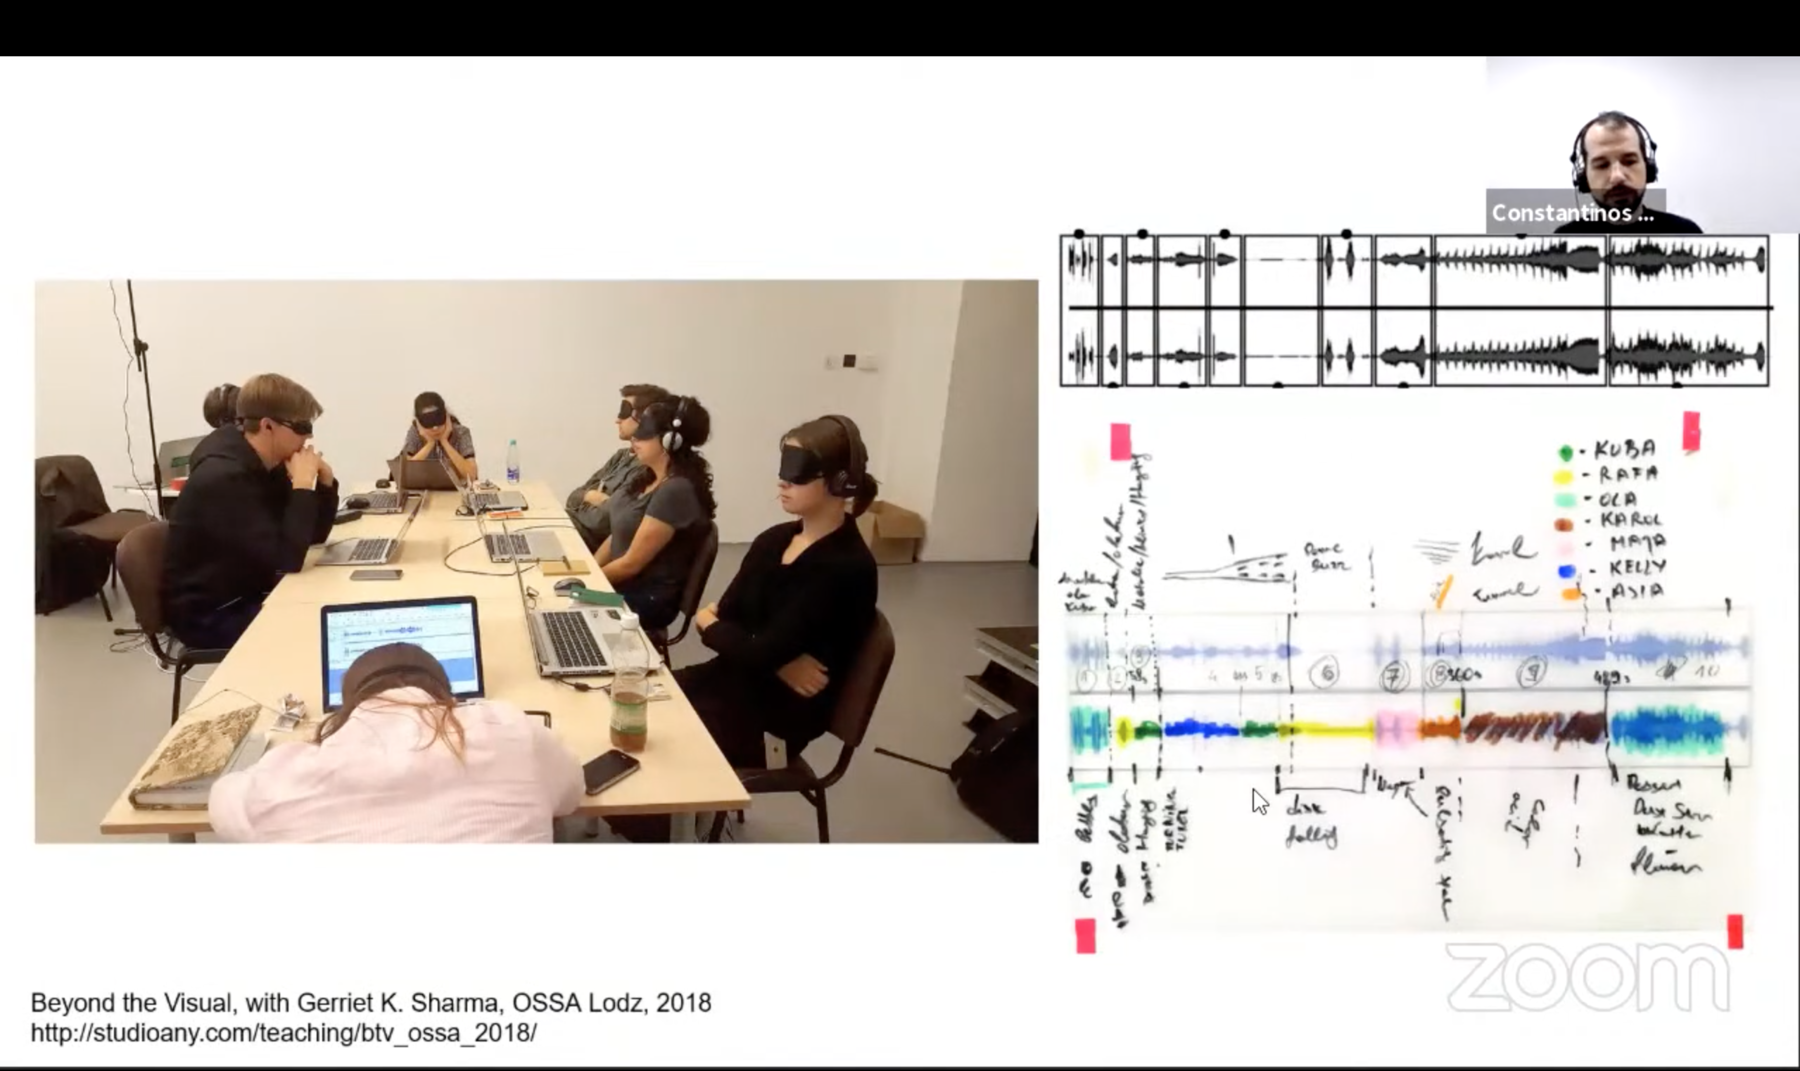 Screenshot of Constantinos Miltiadis's talk, Spacing. We can see a photograph of people sitting at a table with eye-masks on, next to the photograph is a sound wave bar and some hand-drawn notations 